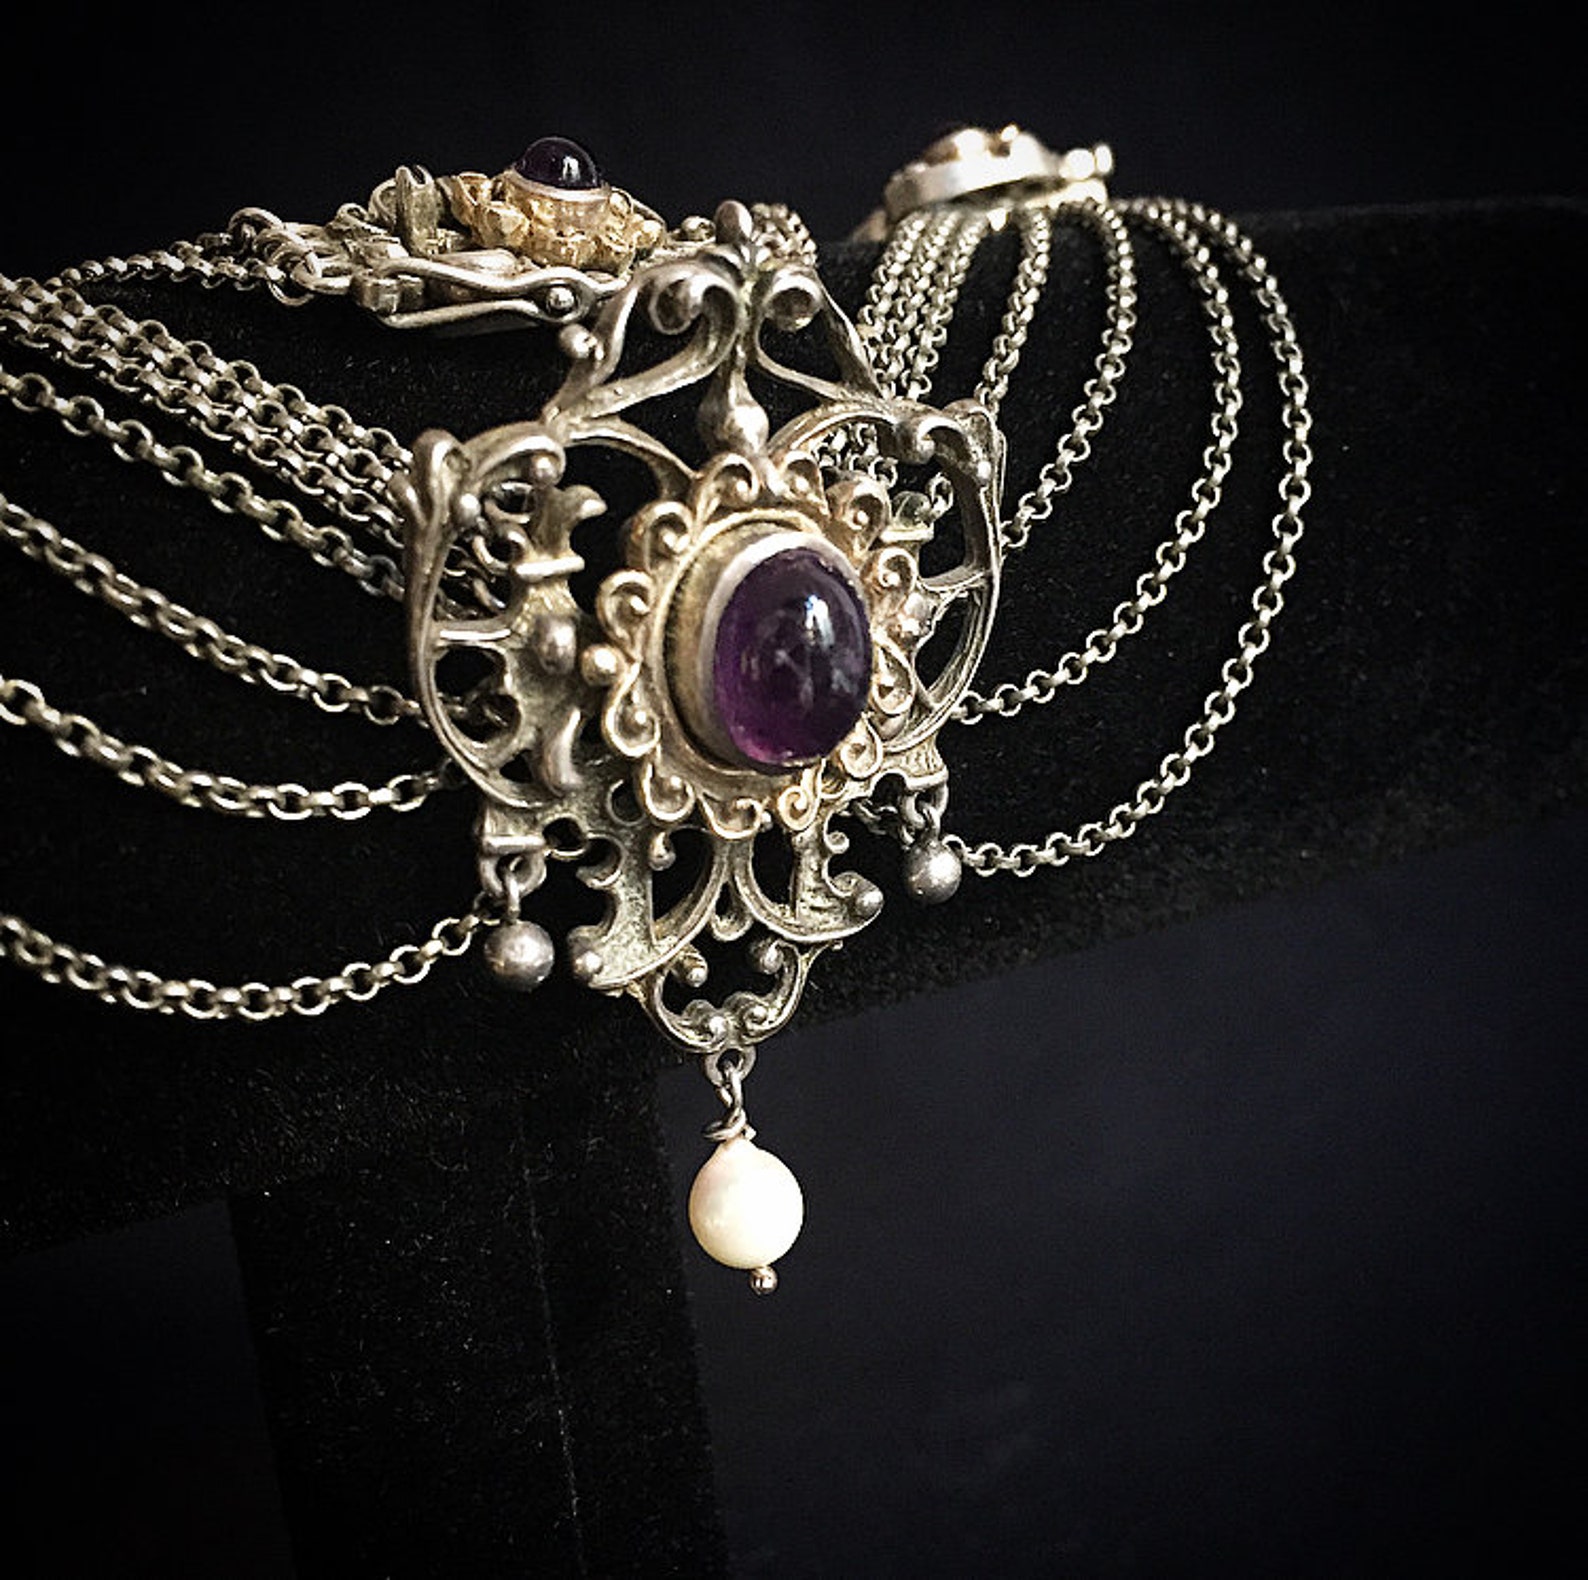 Sumptuous Bartel & Sohn traditional costume necklace /825 silver with amethyst cabochons and pearl/gold-plated /vintage